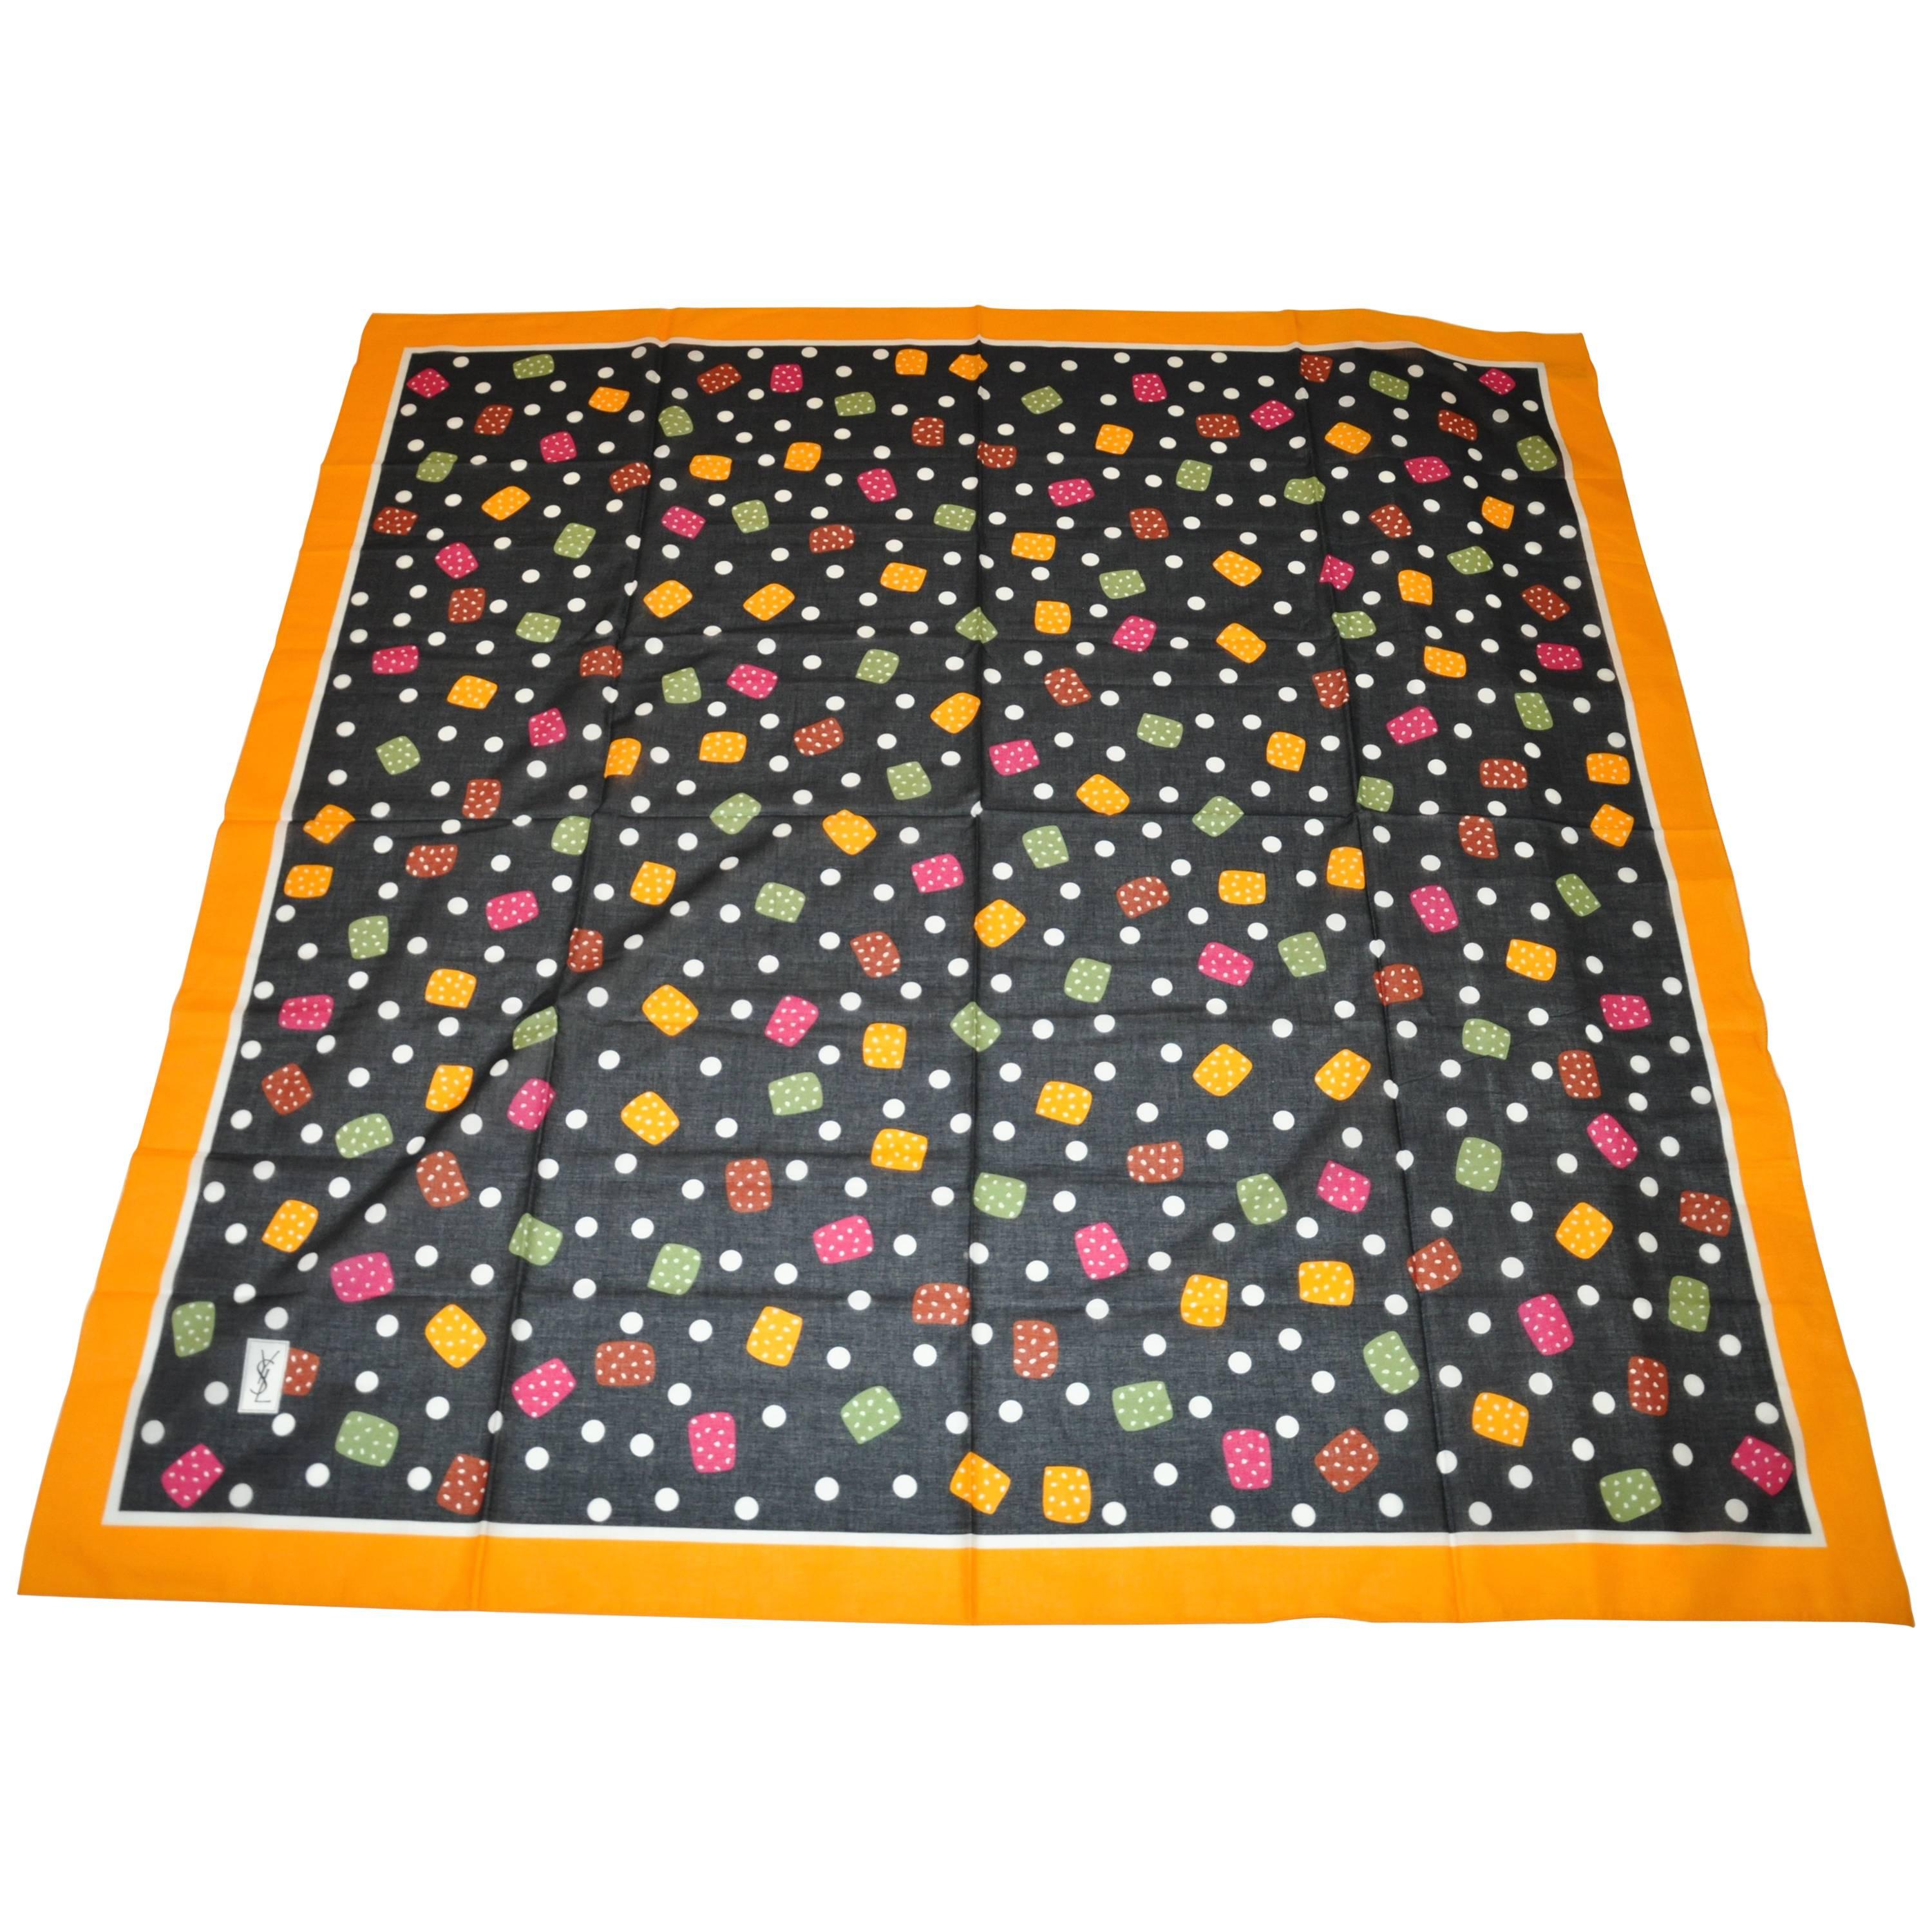 Yves Saint Laurent Huge "Candy Drops" with Yellow Border Cotton Scarf For Sale